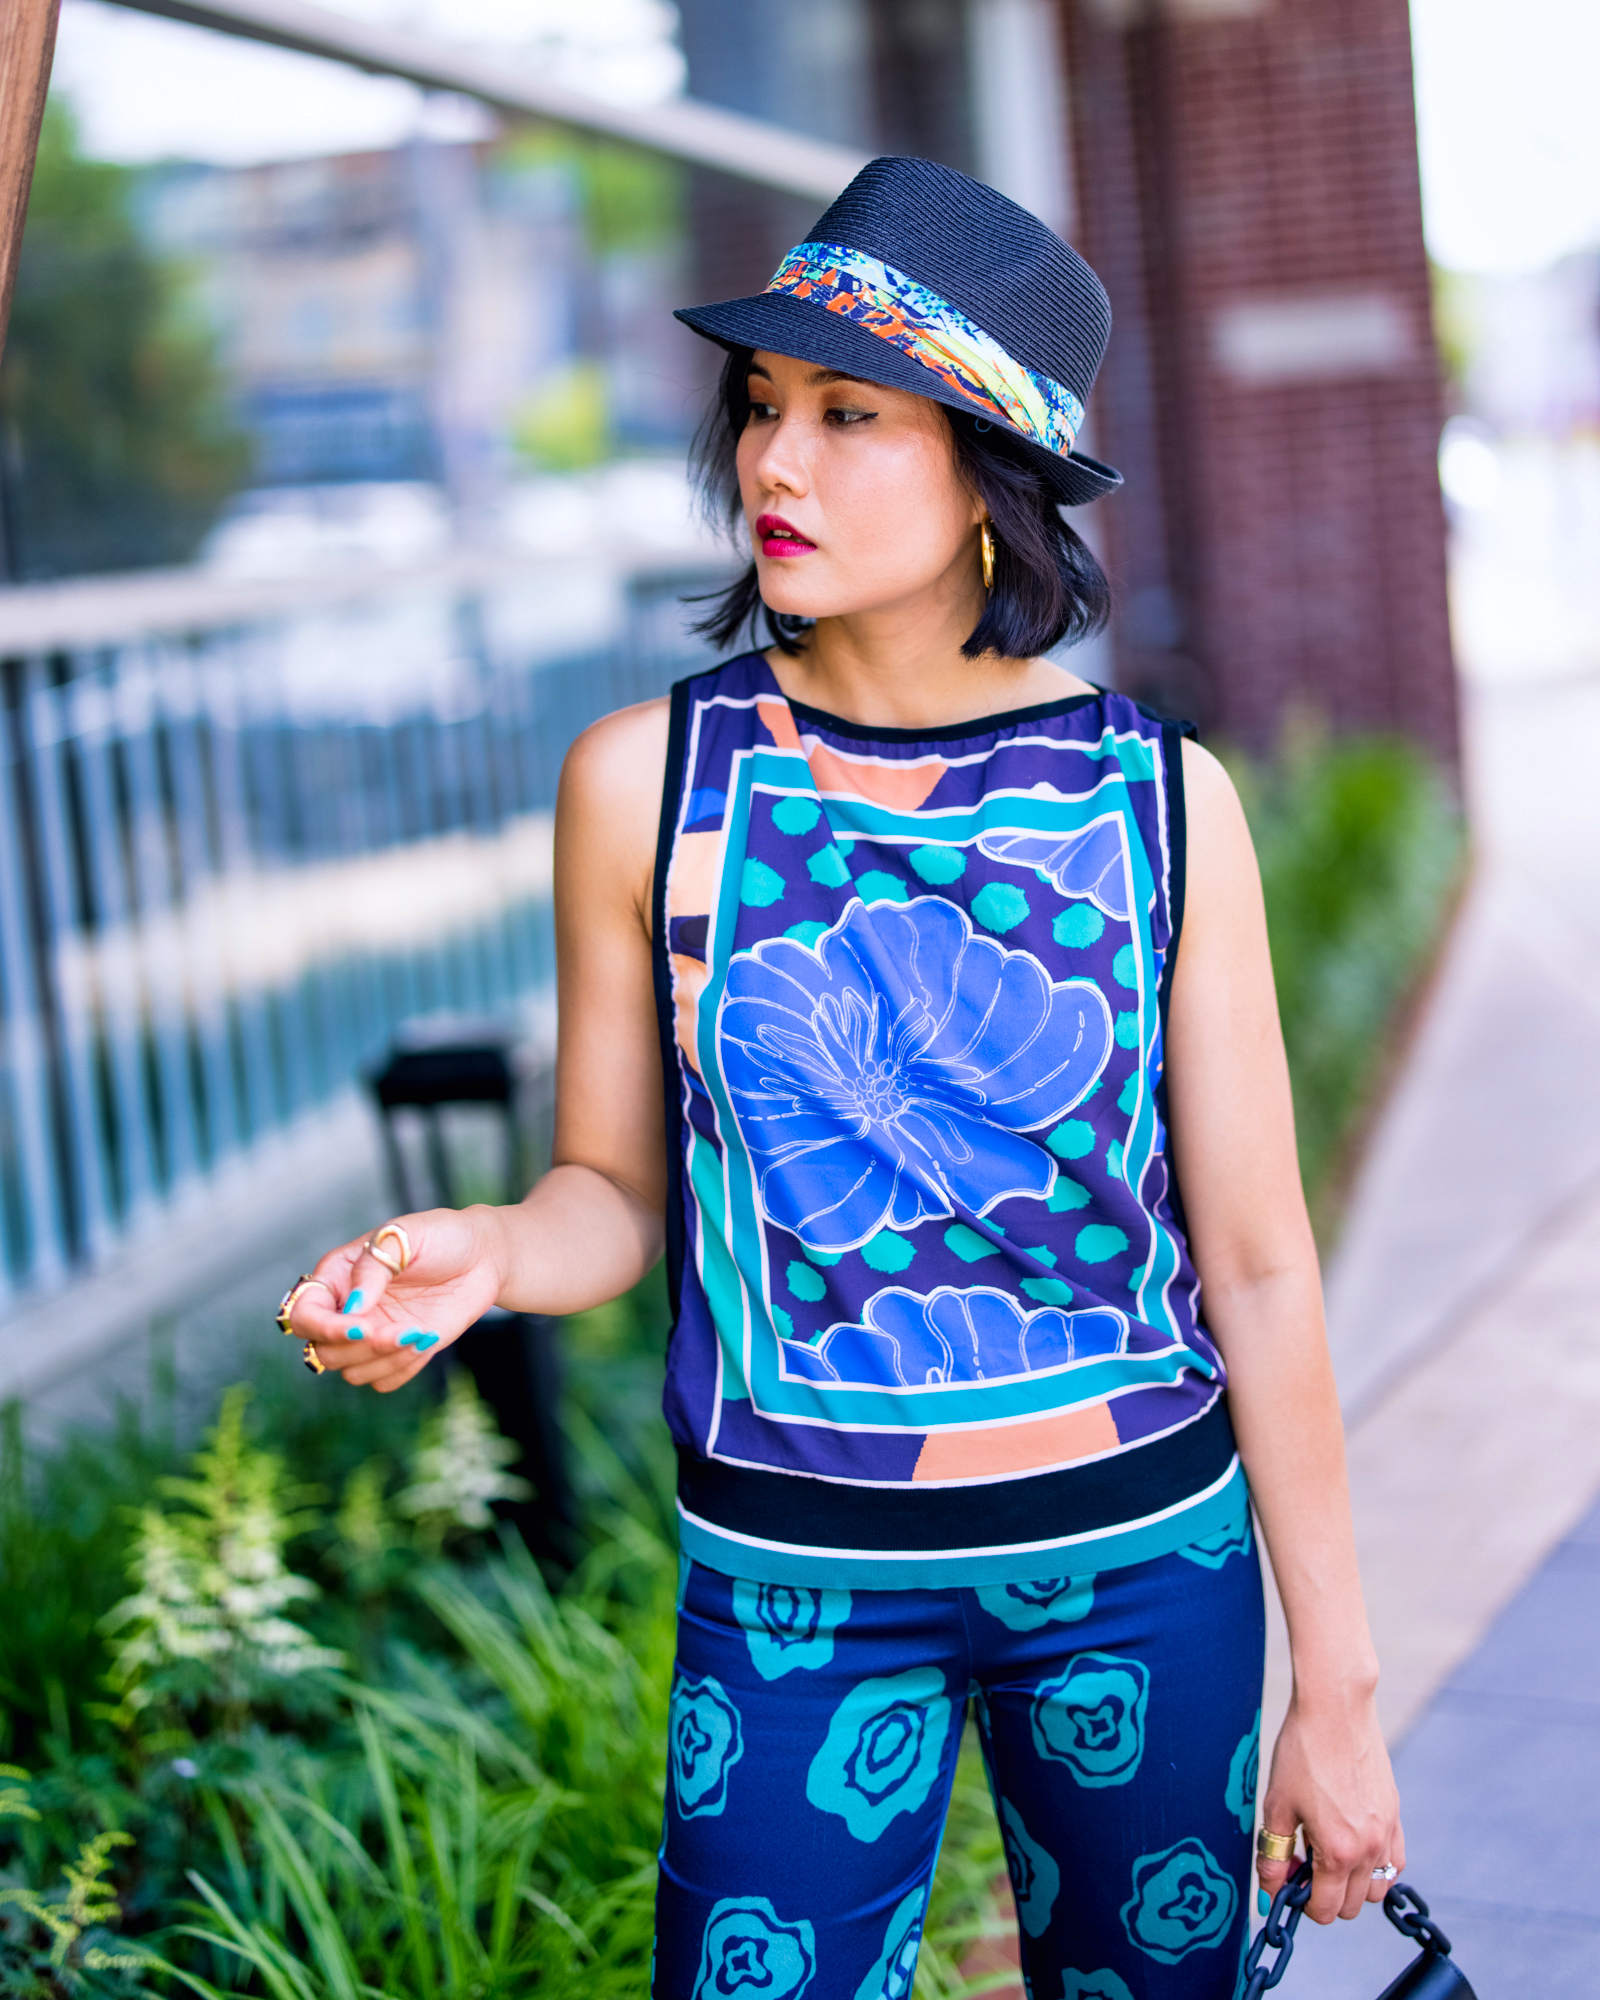 nanphanita jacob is strolling in nyc with women's ultra braid fedora with tri fold novelty print band by san diego hat company